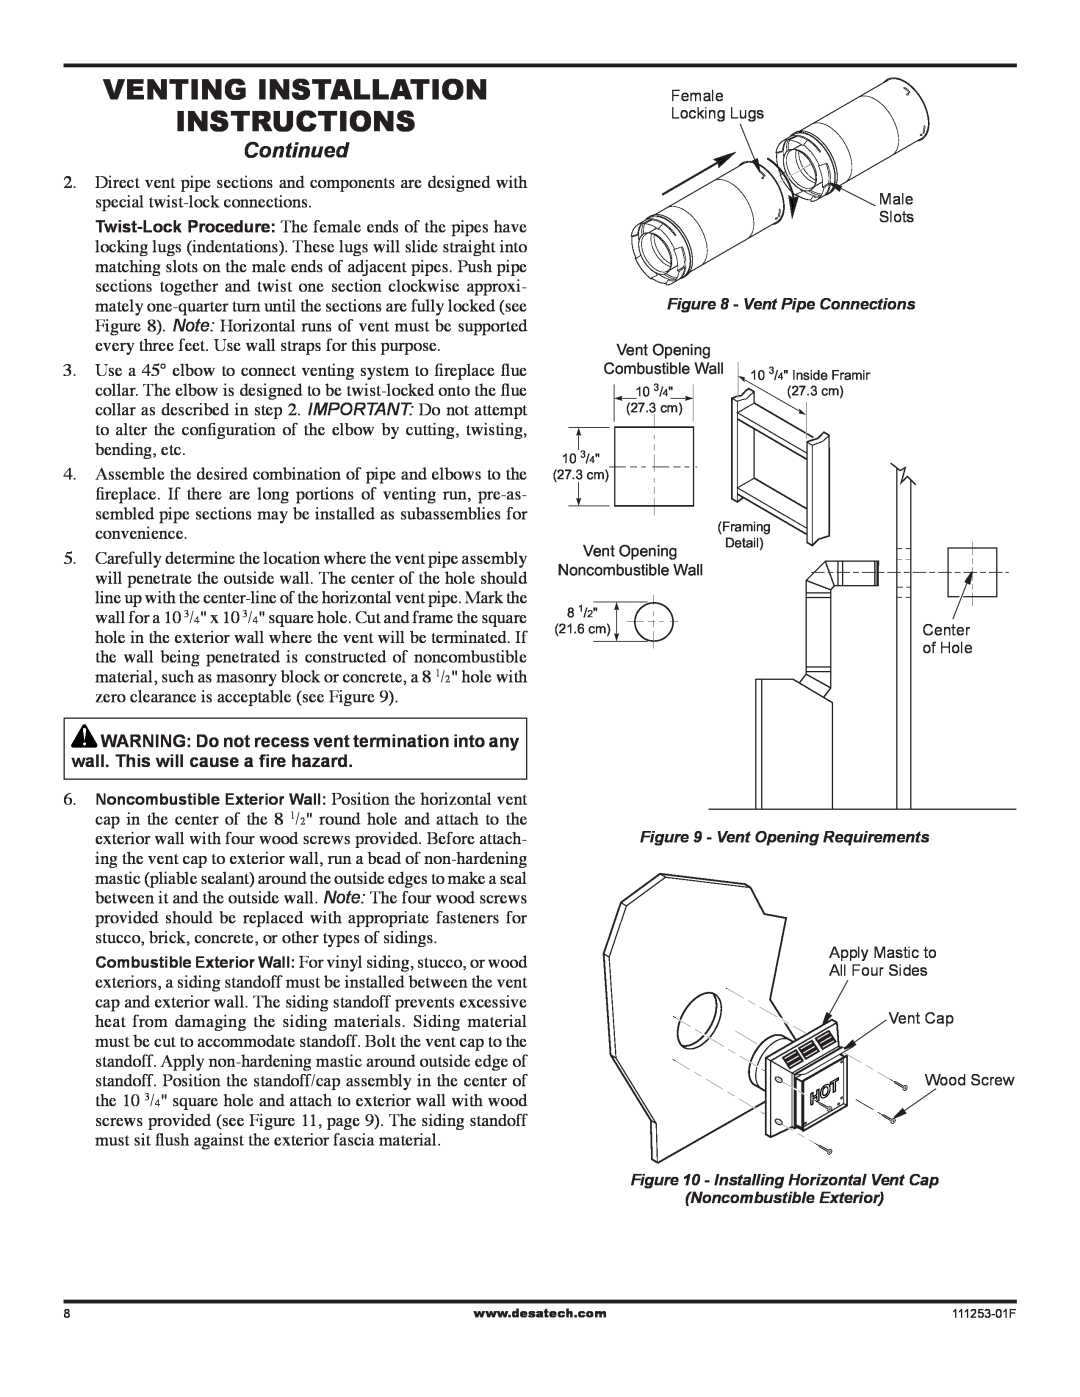 Desa VV36ENC1 SERIES Venting Installation instructions, Continued, Vent Pipe Connections, Vent Opening Requirements 